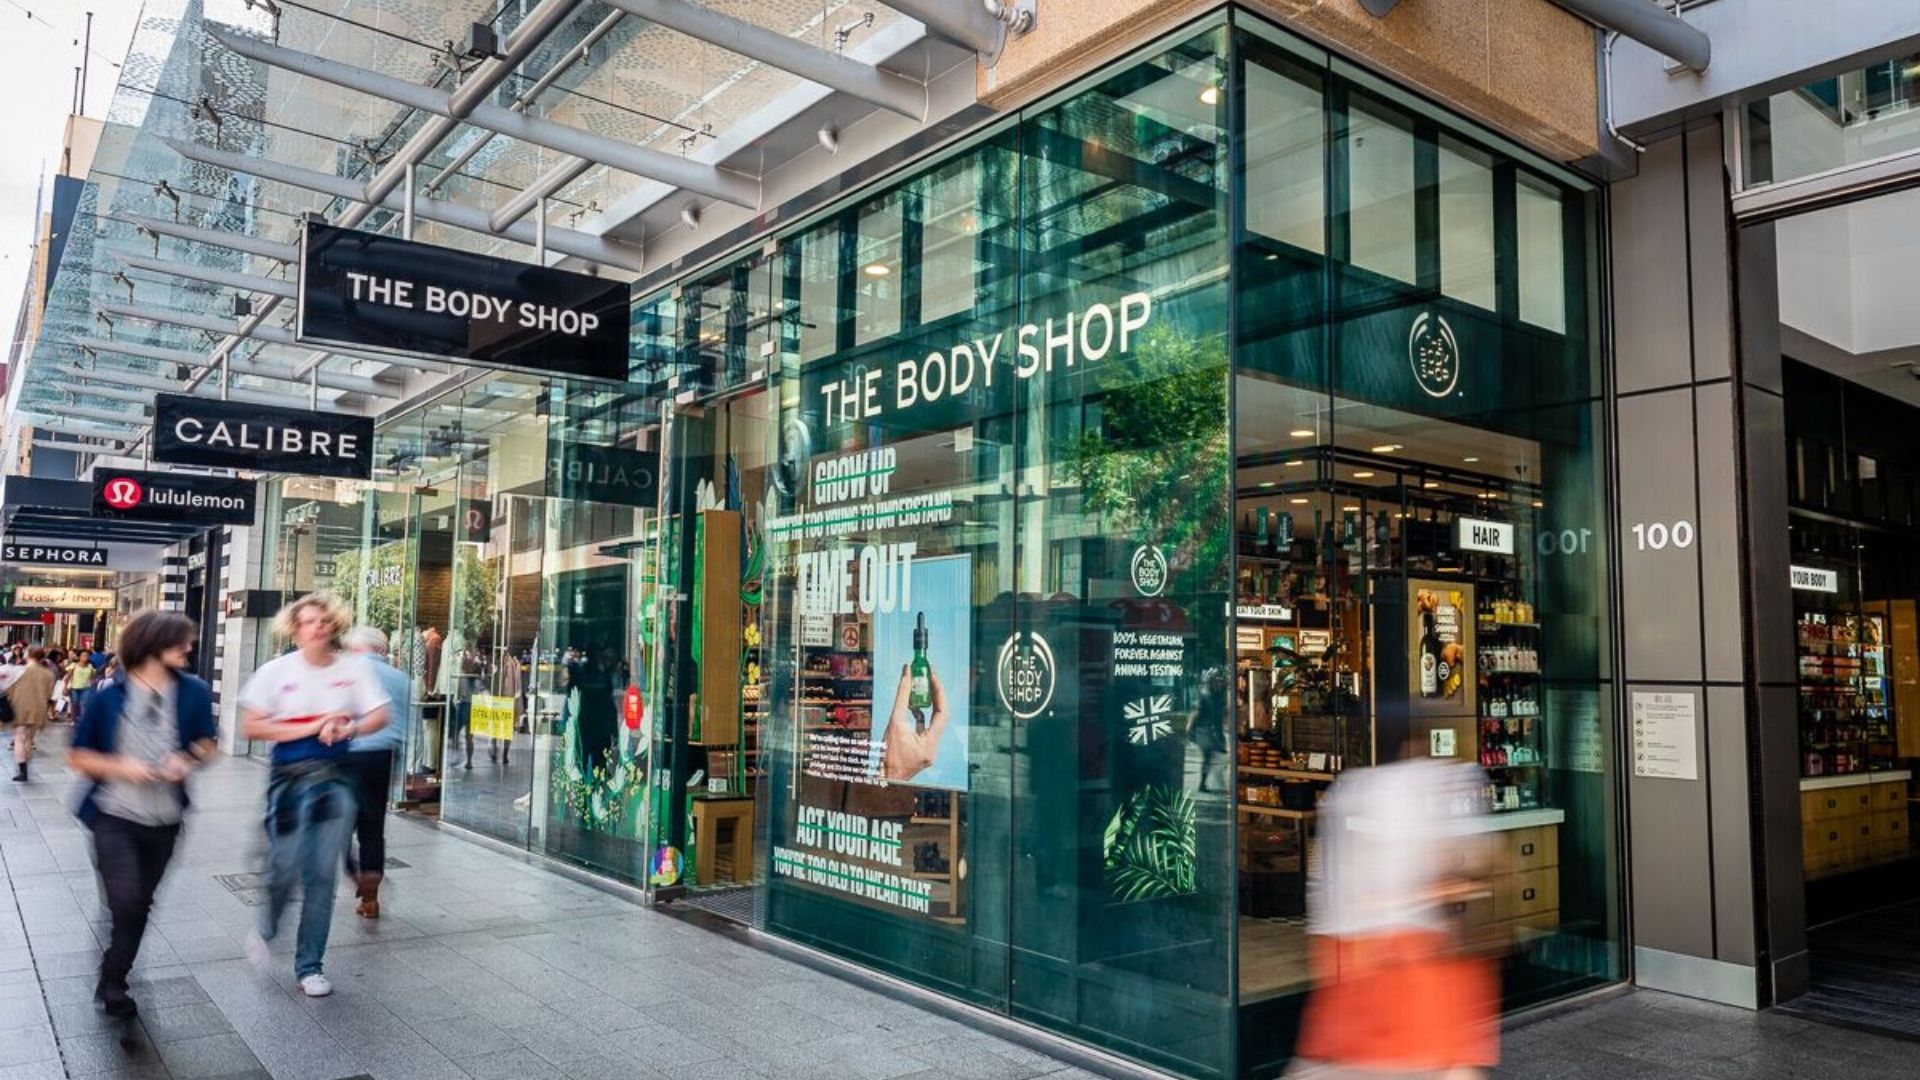 Adelaide Central Plaza - The Body Shop